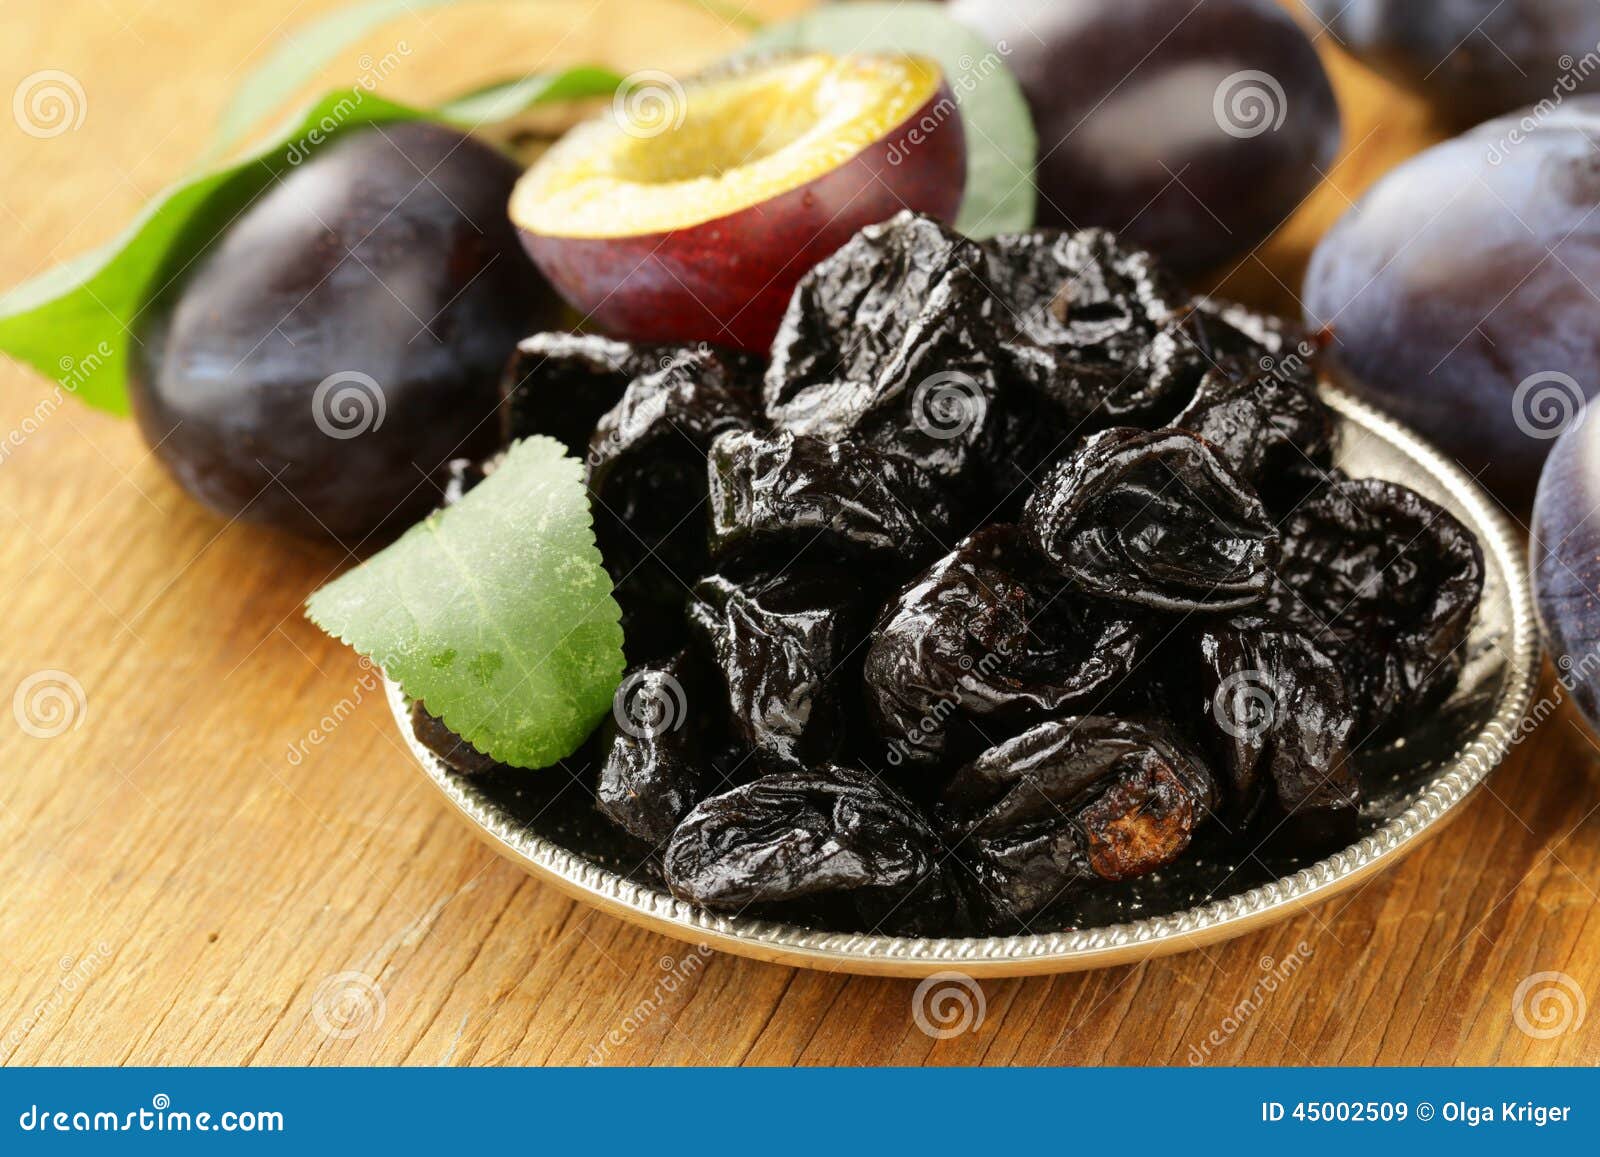 dried plums prunes and fresh berries